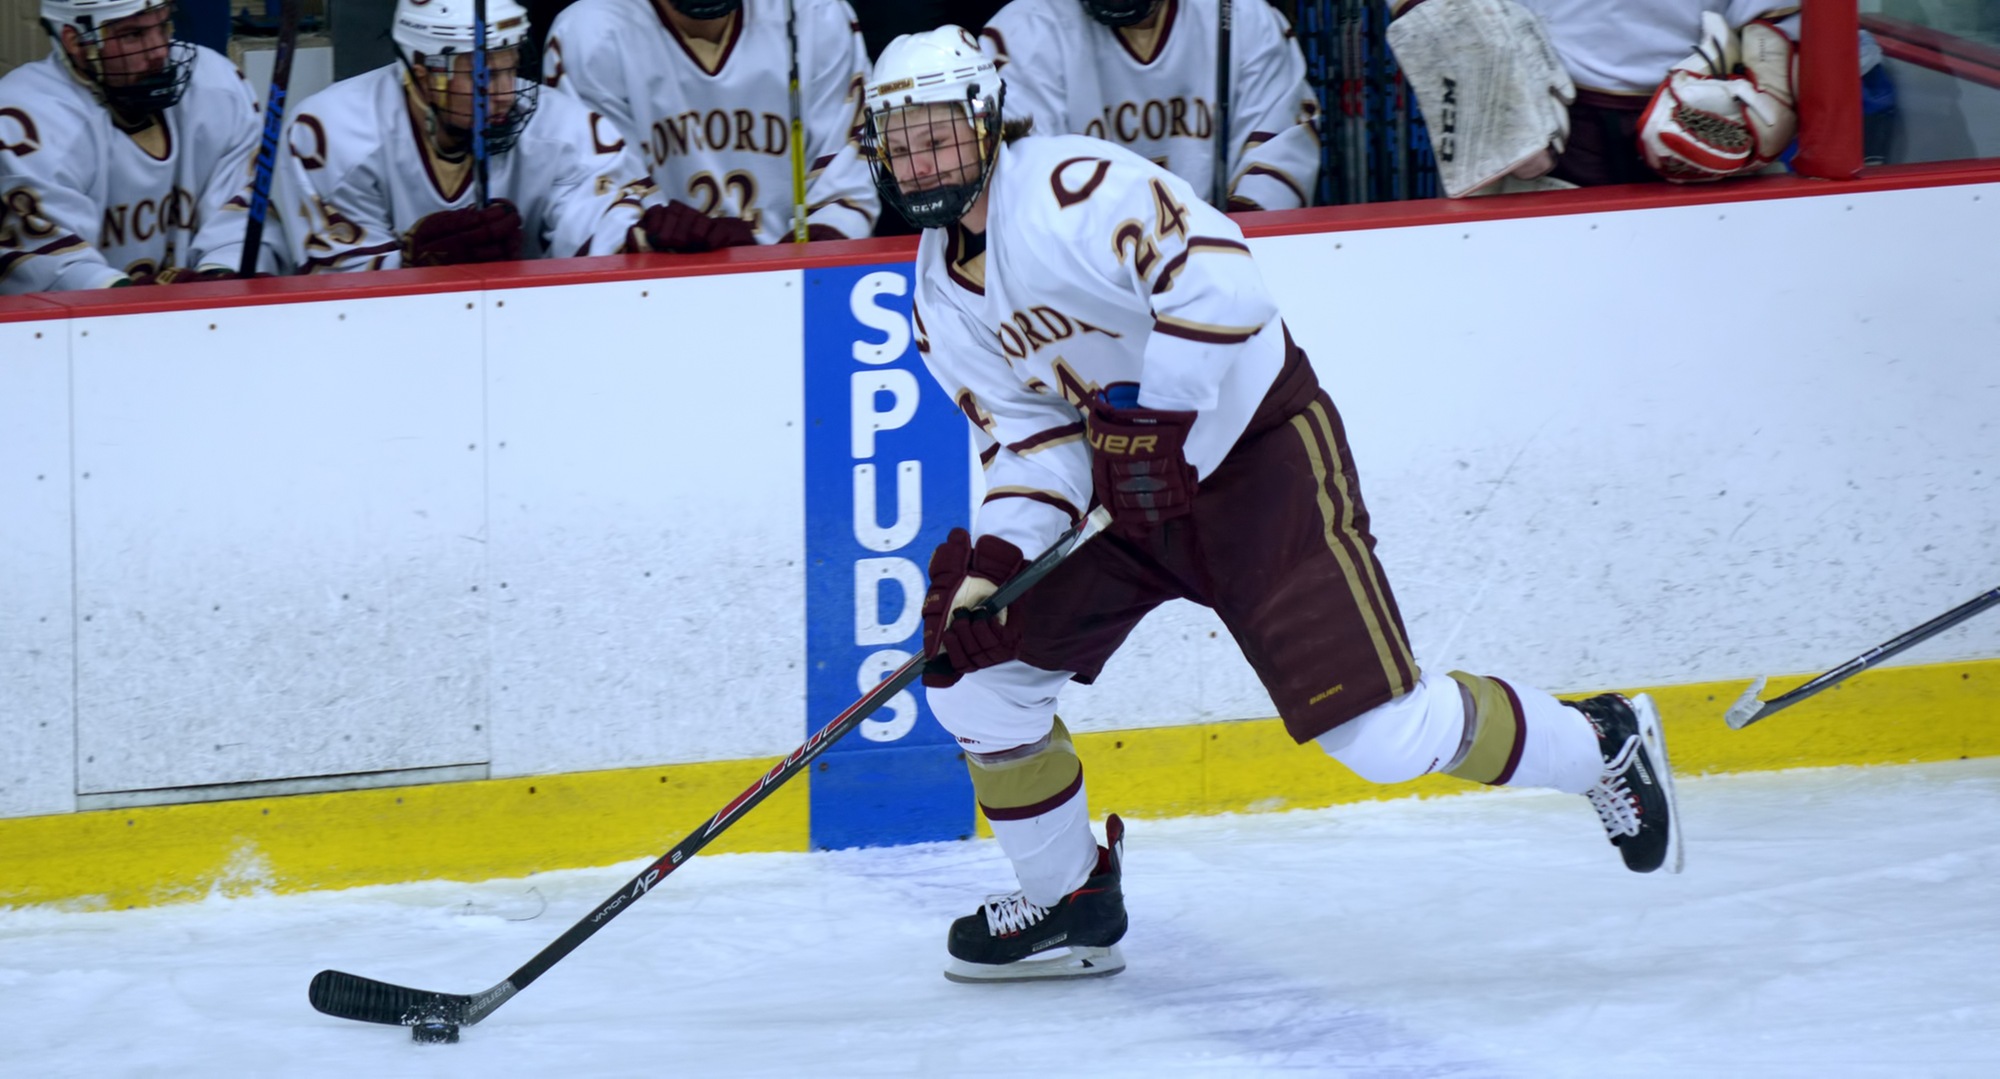 Sophomore Jake Ellingson scored the game-winning goal with 7.1 seconds left in overtime to give the Cobbers a 4-3 win over No.14-ranked Milwaukee School of Engineering.